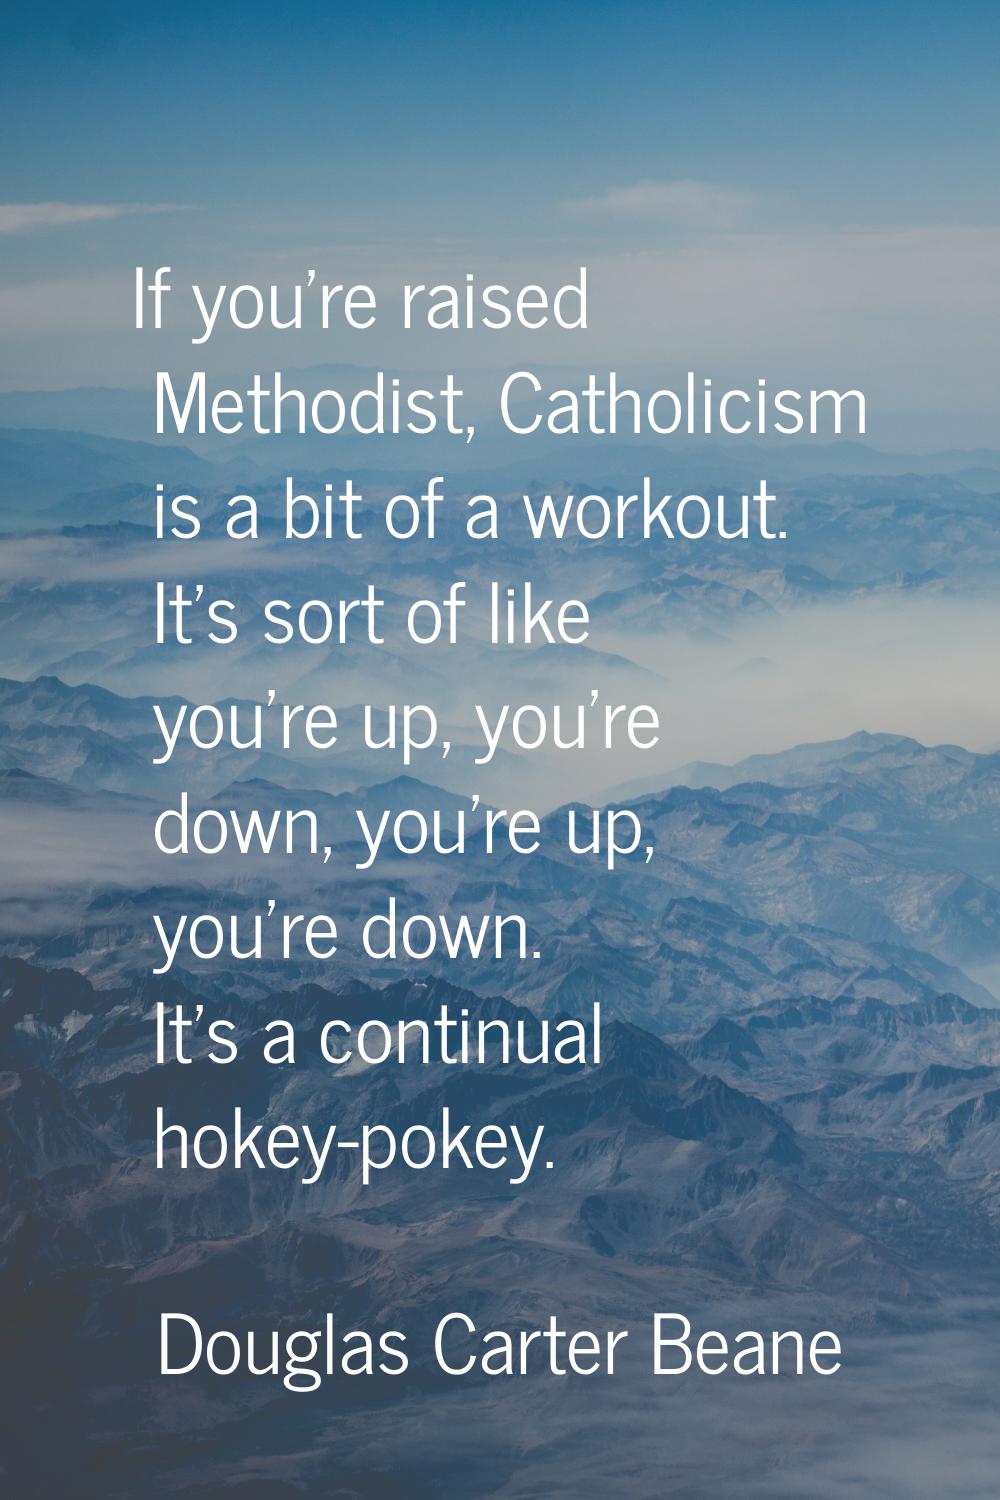 If you're raised Methodist, Catholicism is a bit of a workout. It's sort of like you're up, you're 